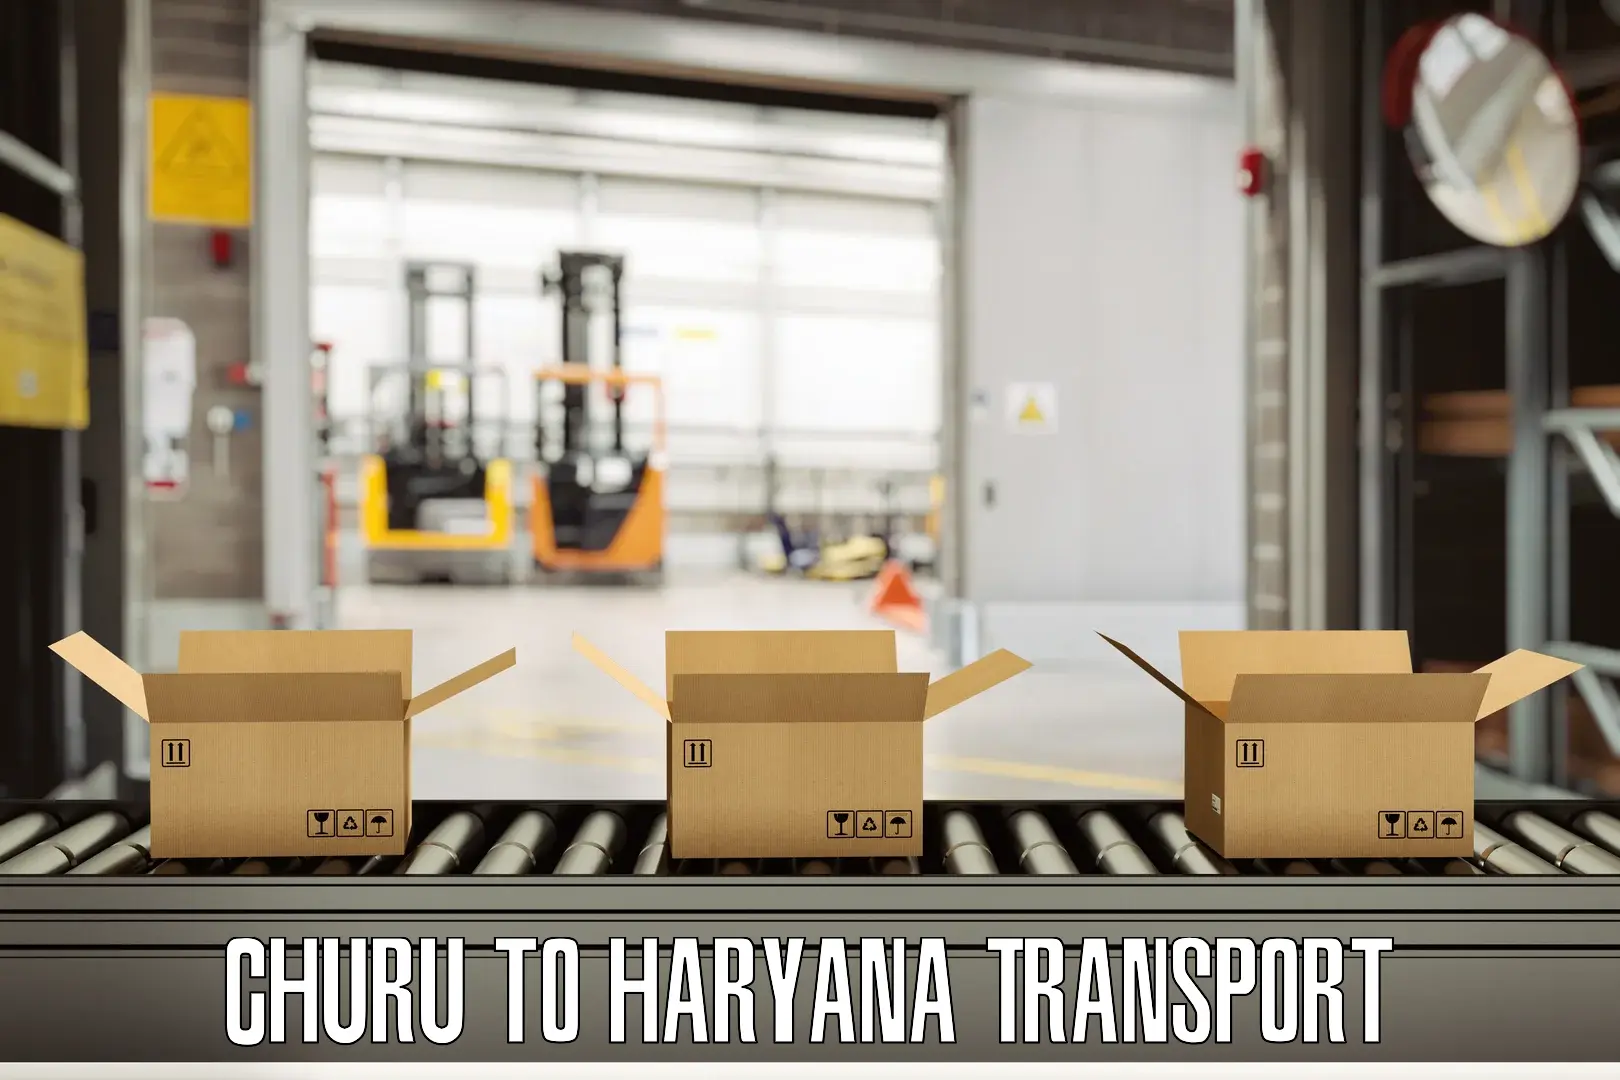 Best transport services in India Churu to NCR Haryana